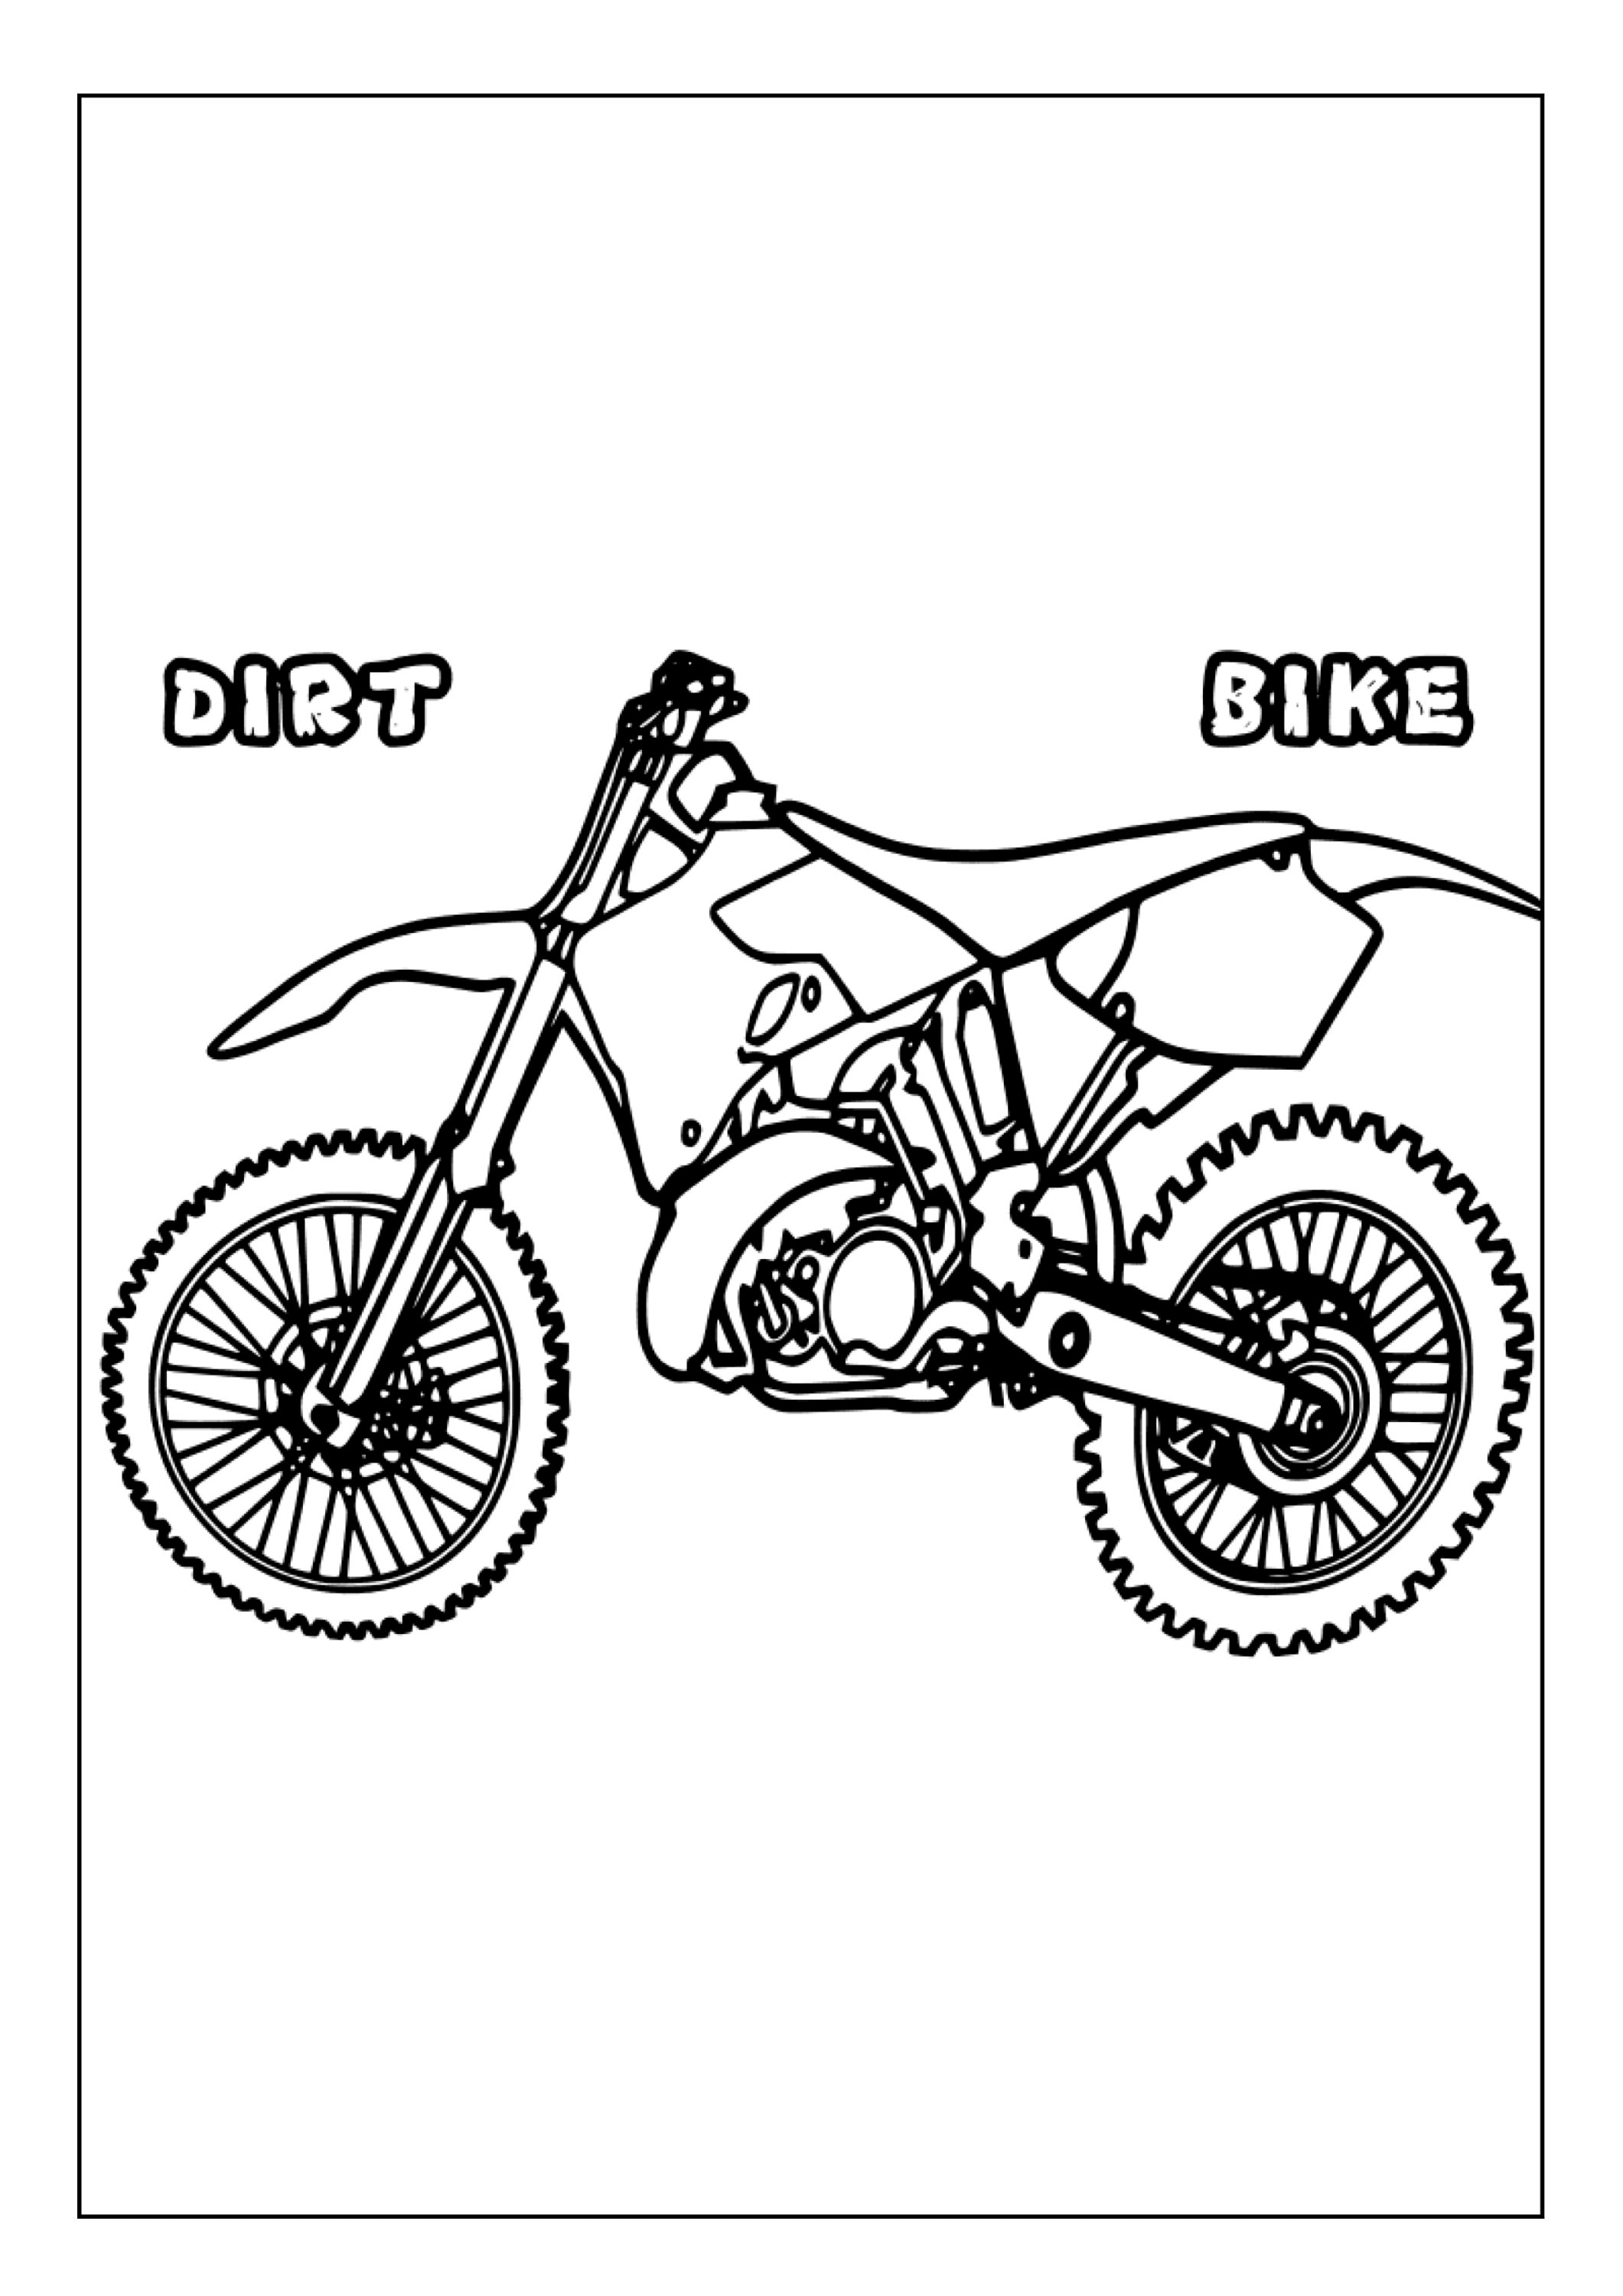 133 Dirt Bike Coloring Pages: Rev Up Your Creativity 27